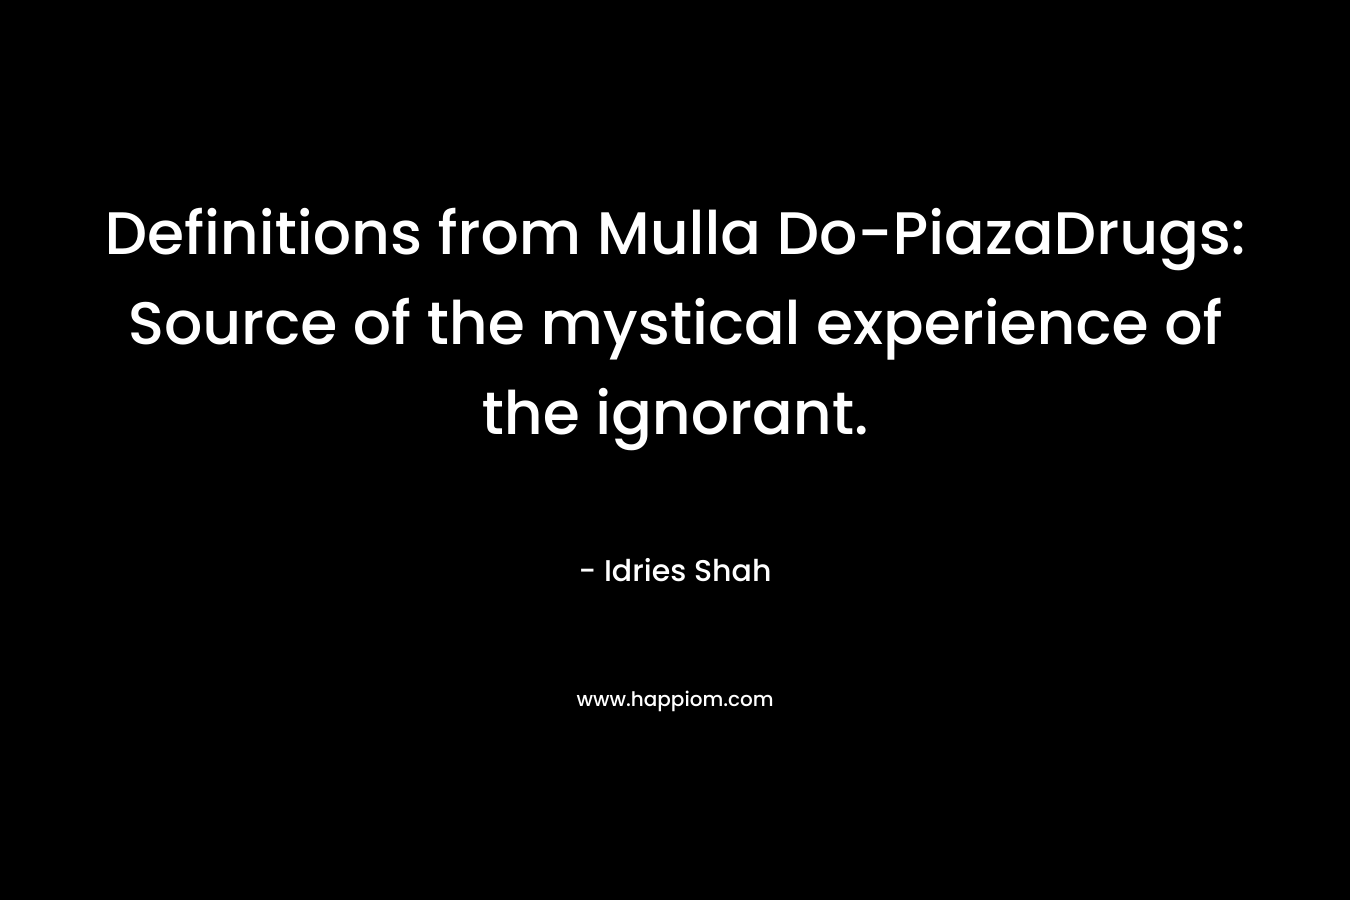 Definitions from Mulla Do-PiazaDrugs: Source of the mystical experience of the ignorant.